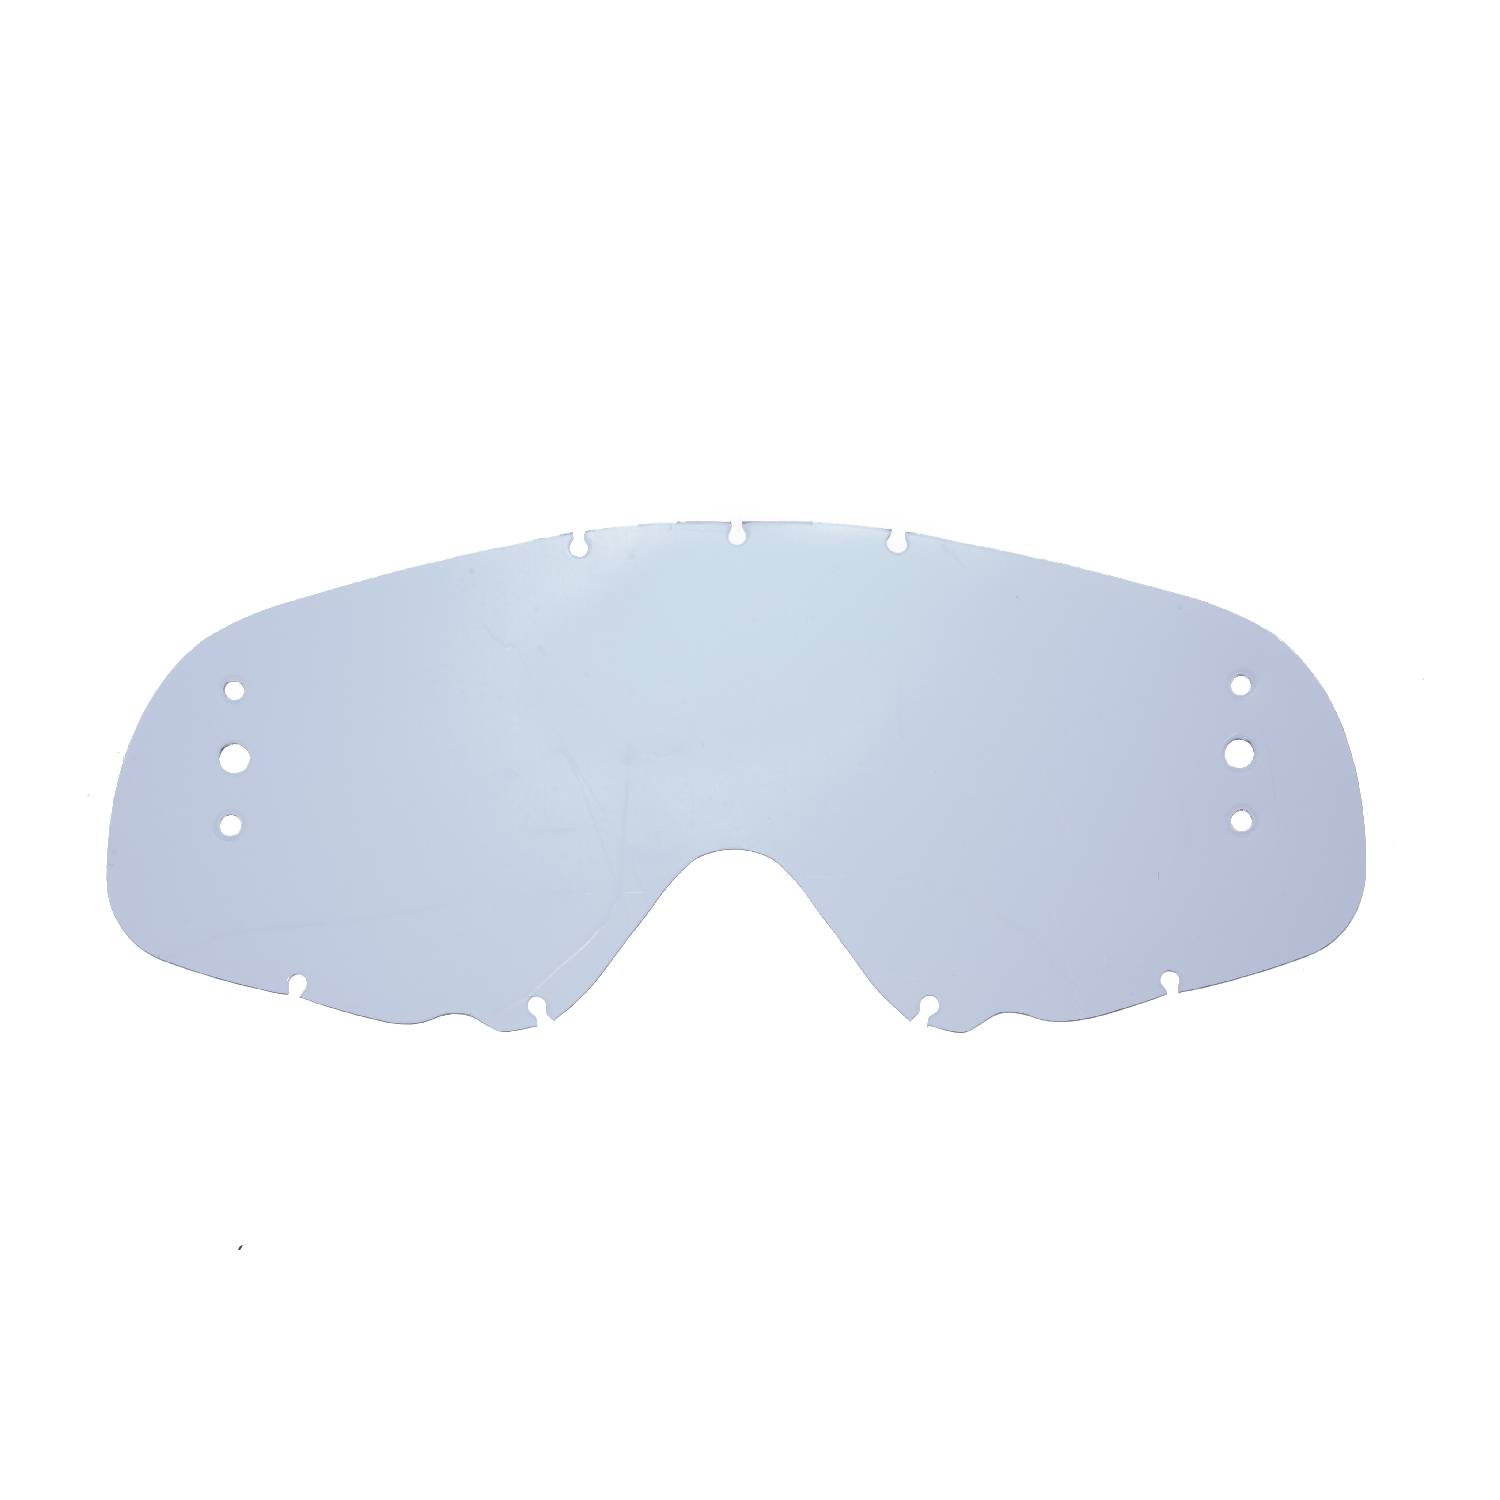 ROLL-OFF lenses with smokey lenses compatible for Oakley Crowbar goggle